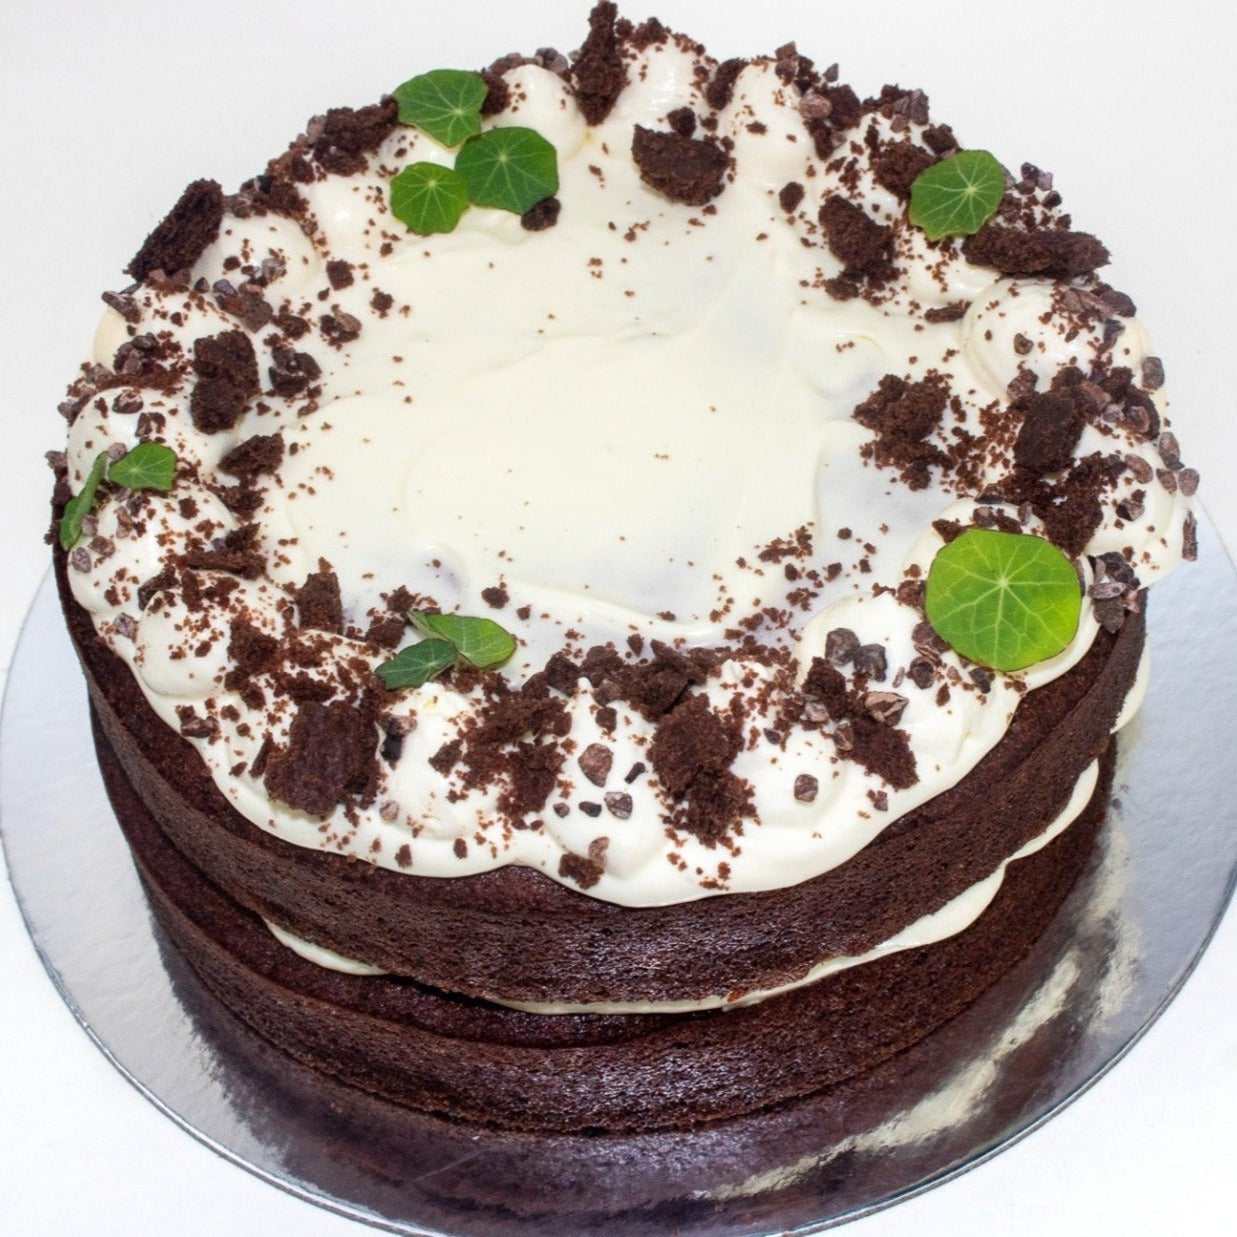 image of the top of the cake showing the white icing, green leaf and cookie pieces for decoration